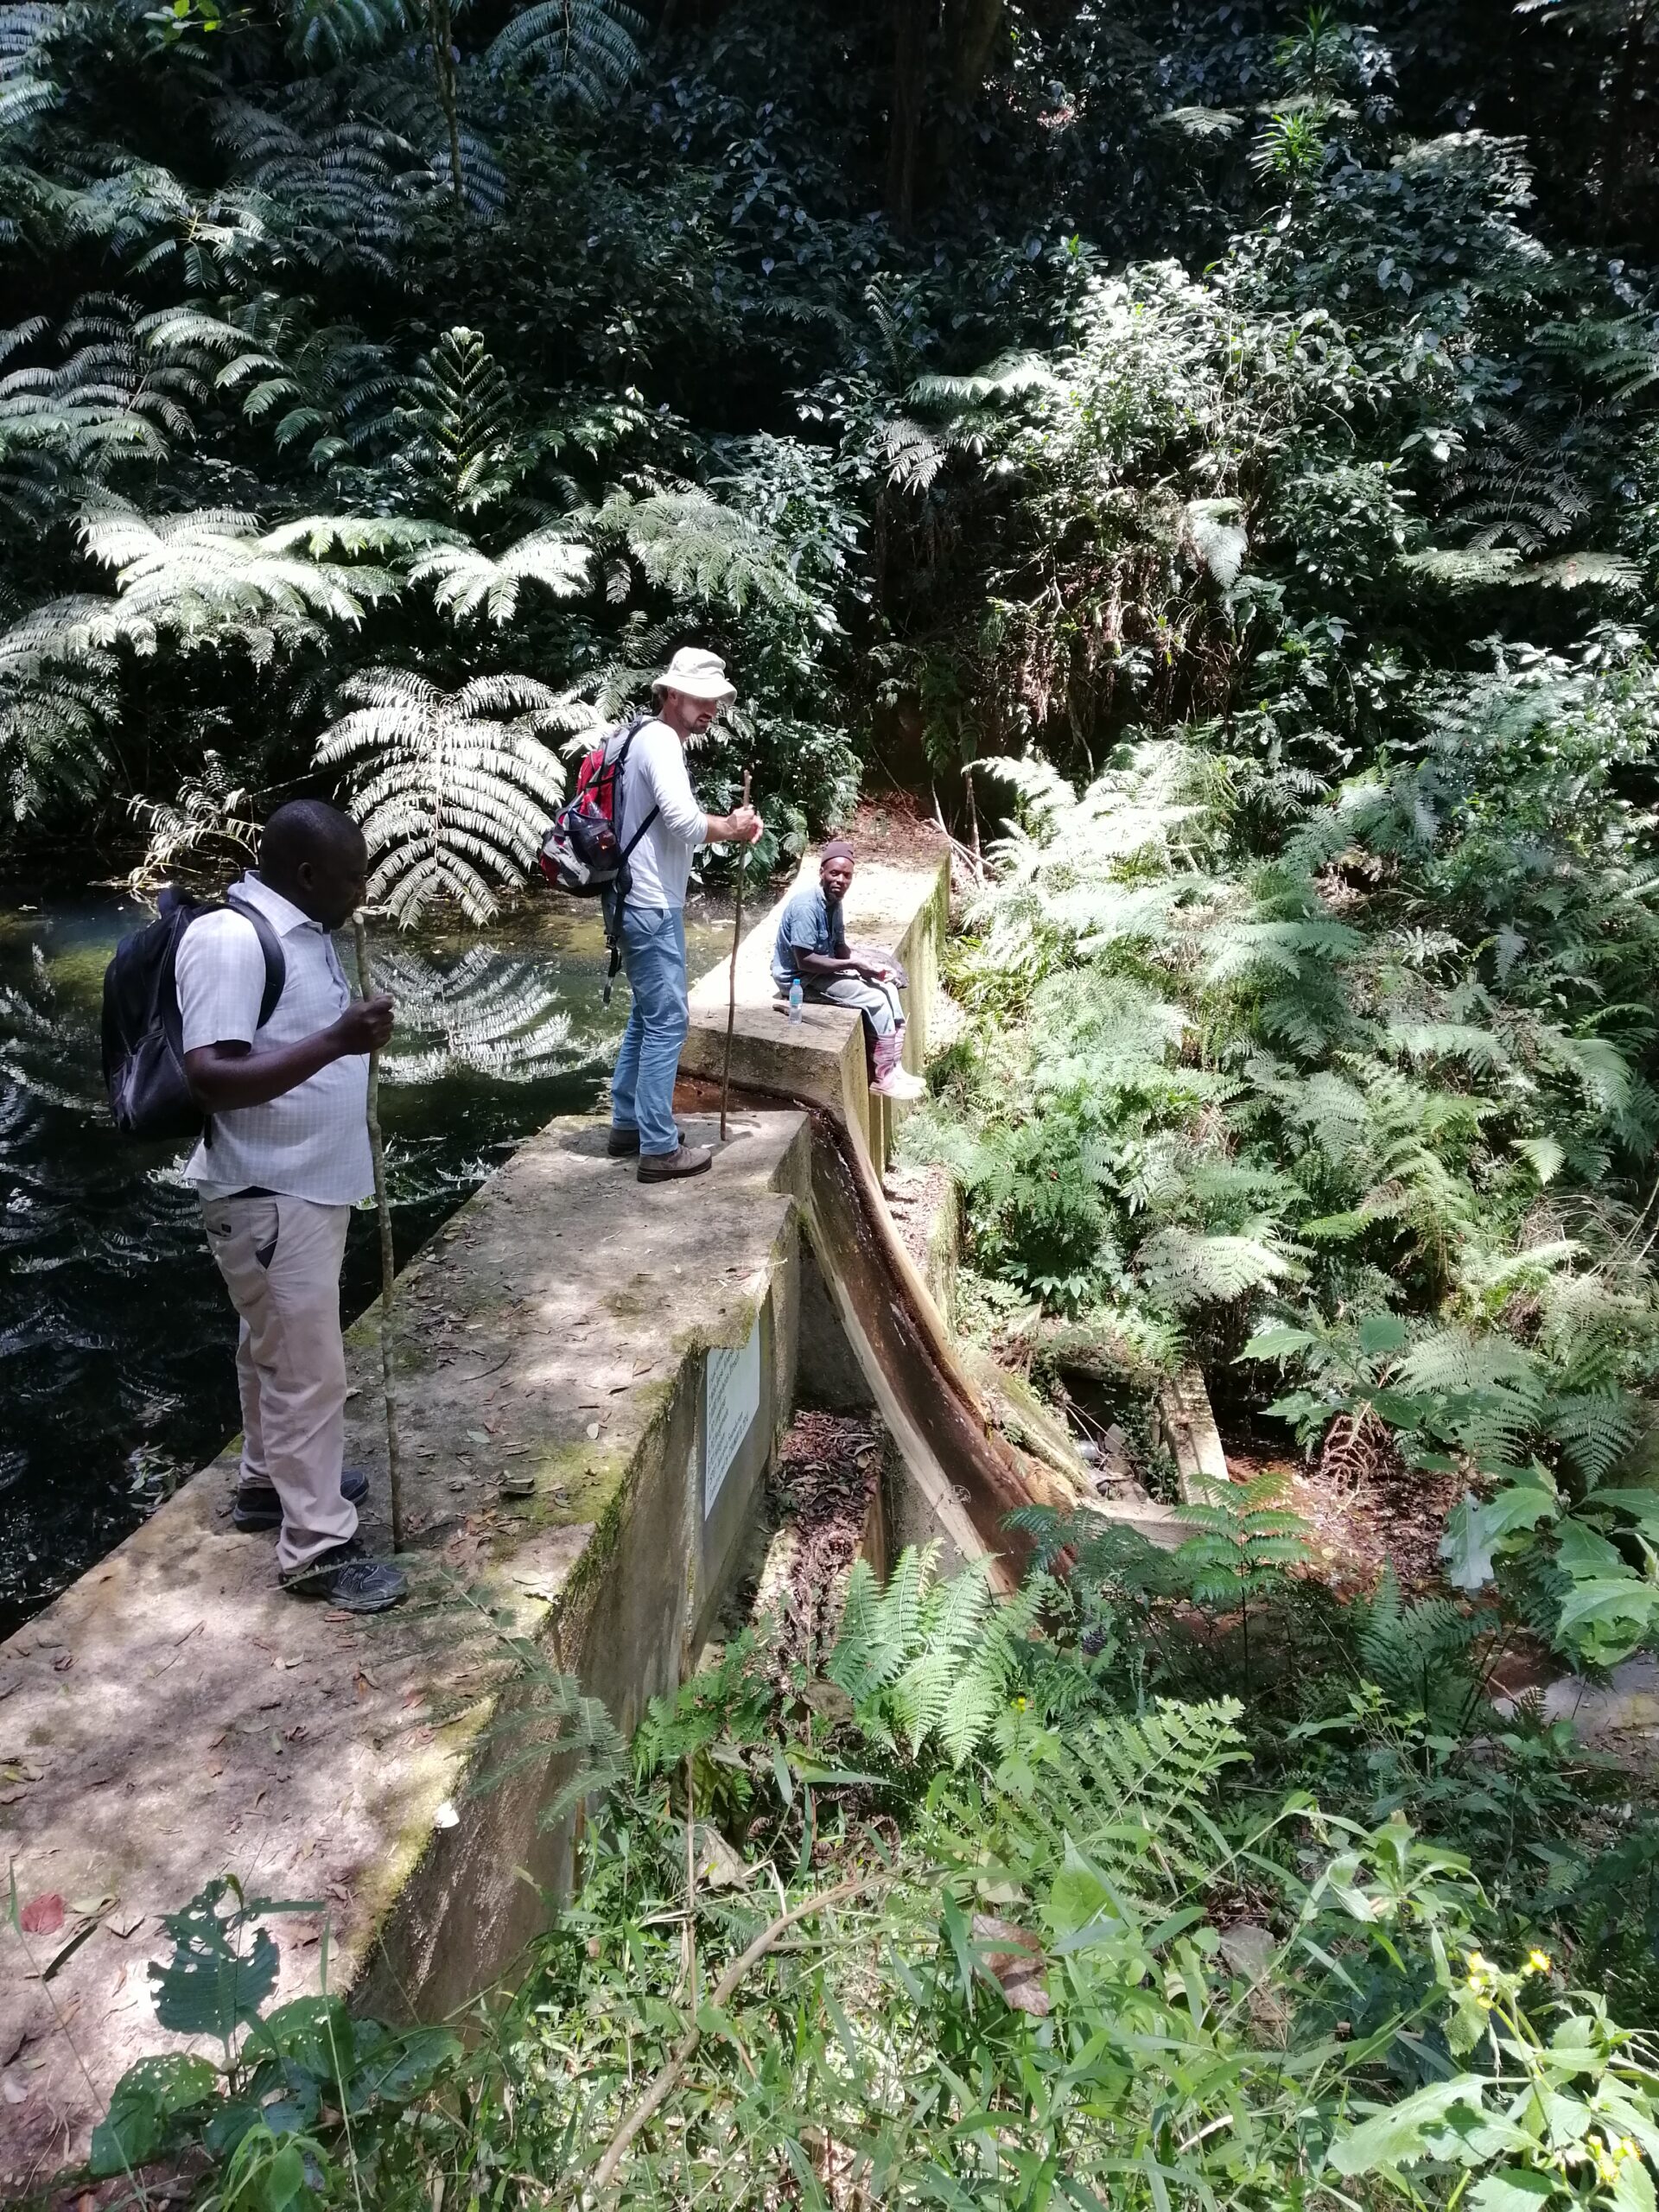 Professor Hähnlein of the Frankfurt University of Applied Sciences together with his colleague from Kenya inspecting on of the sources in Shagayu National Forest